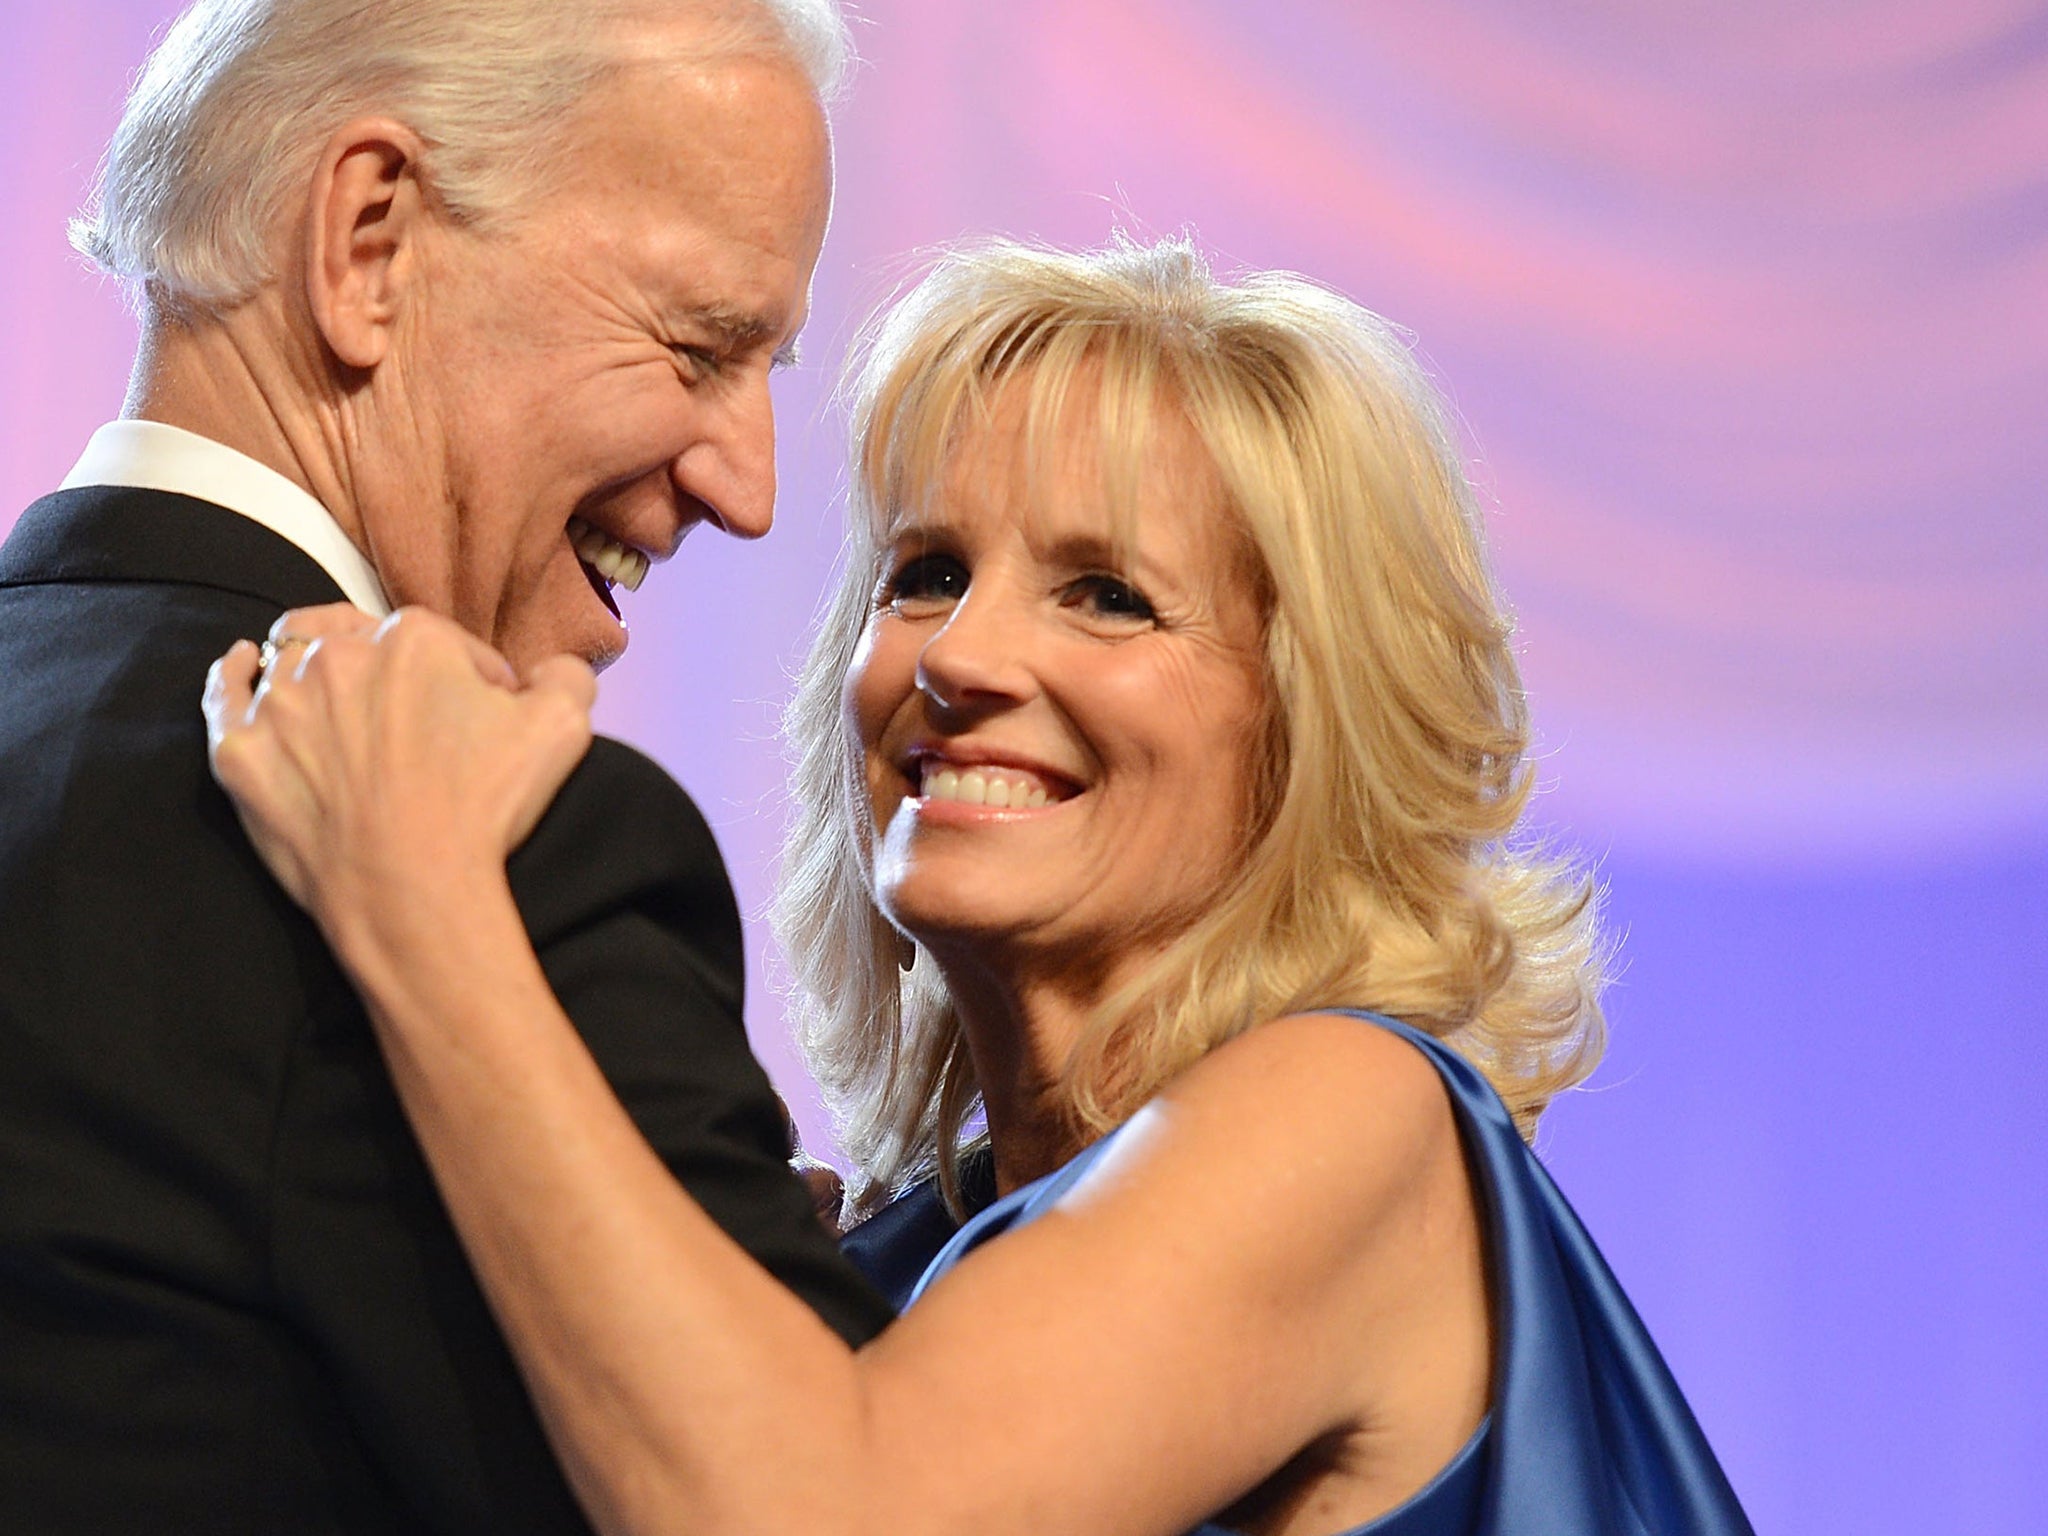 Jill Biden plans to build an ‘an administration that lifts up all Americans’